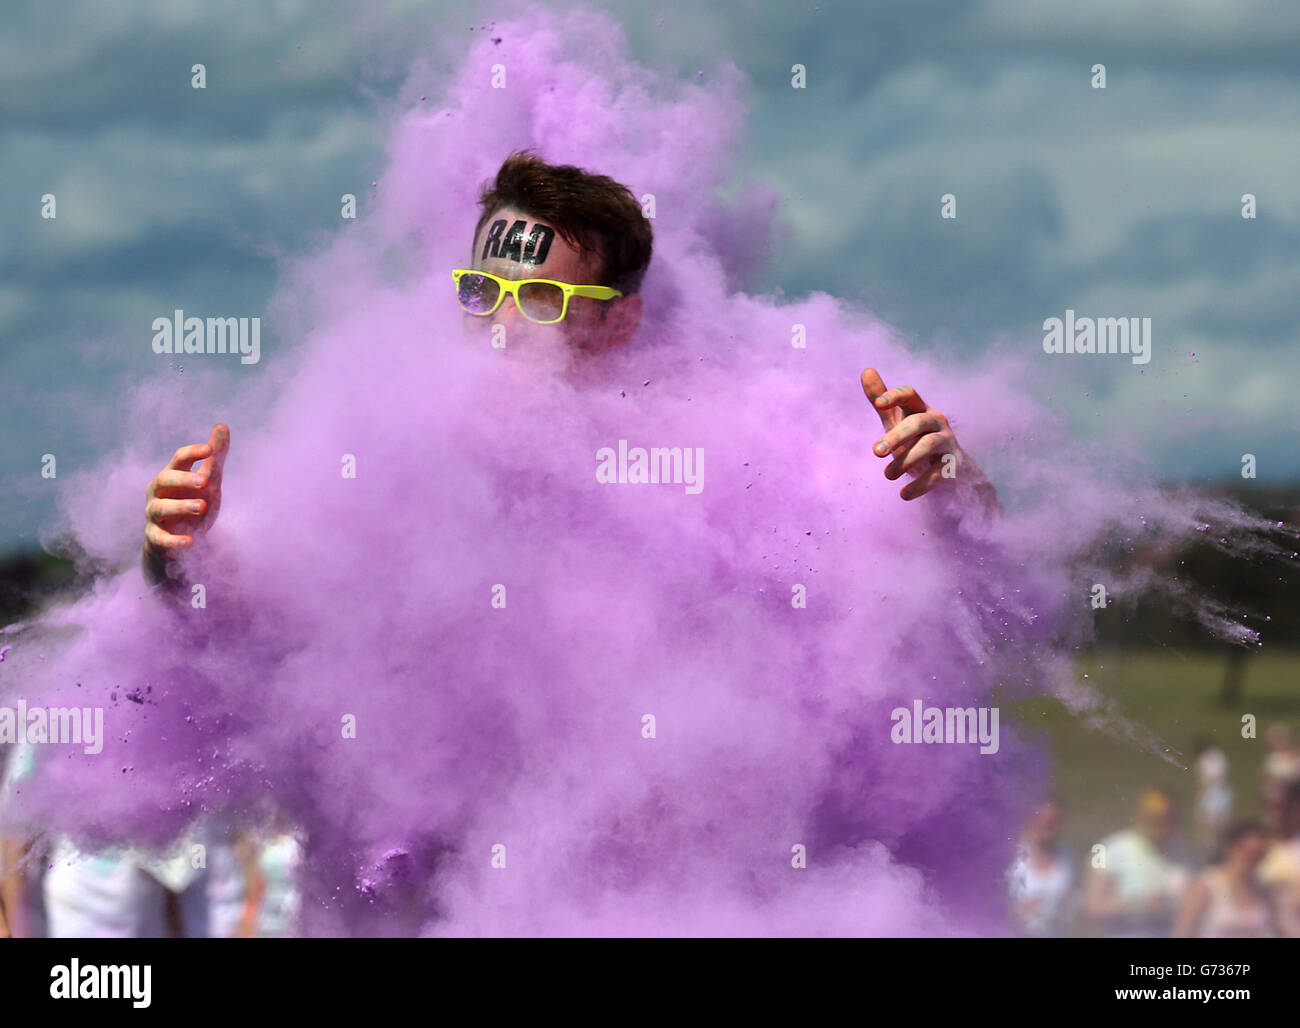 Participants take part in the Color Me Rad 5km run at Ingleston in Edinburgh where the runners are blasted with bombs of different colours during the race. Stock Photo